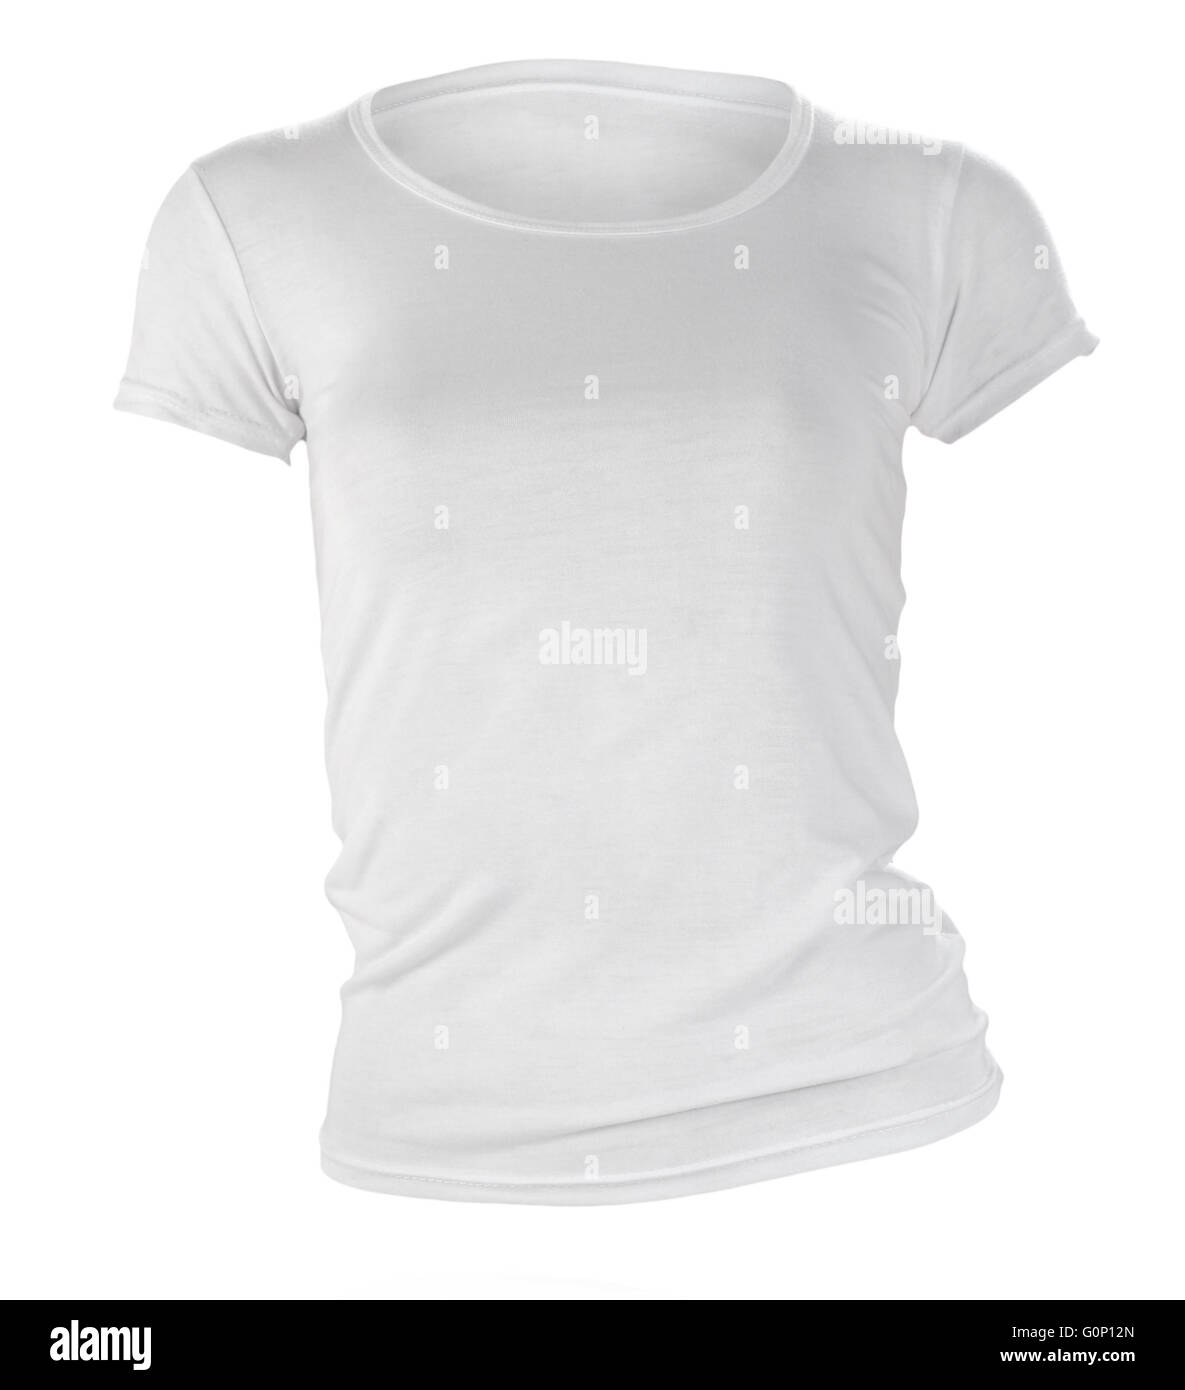 women's blank white t-shirt, front design template Stock Photo - Alamy